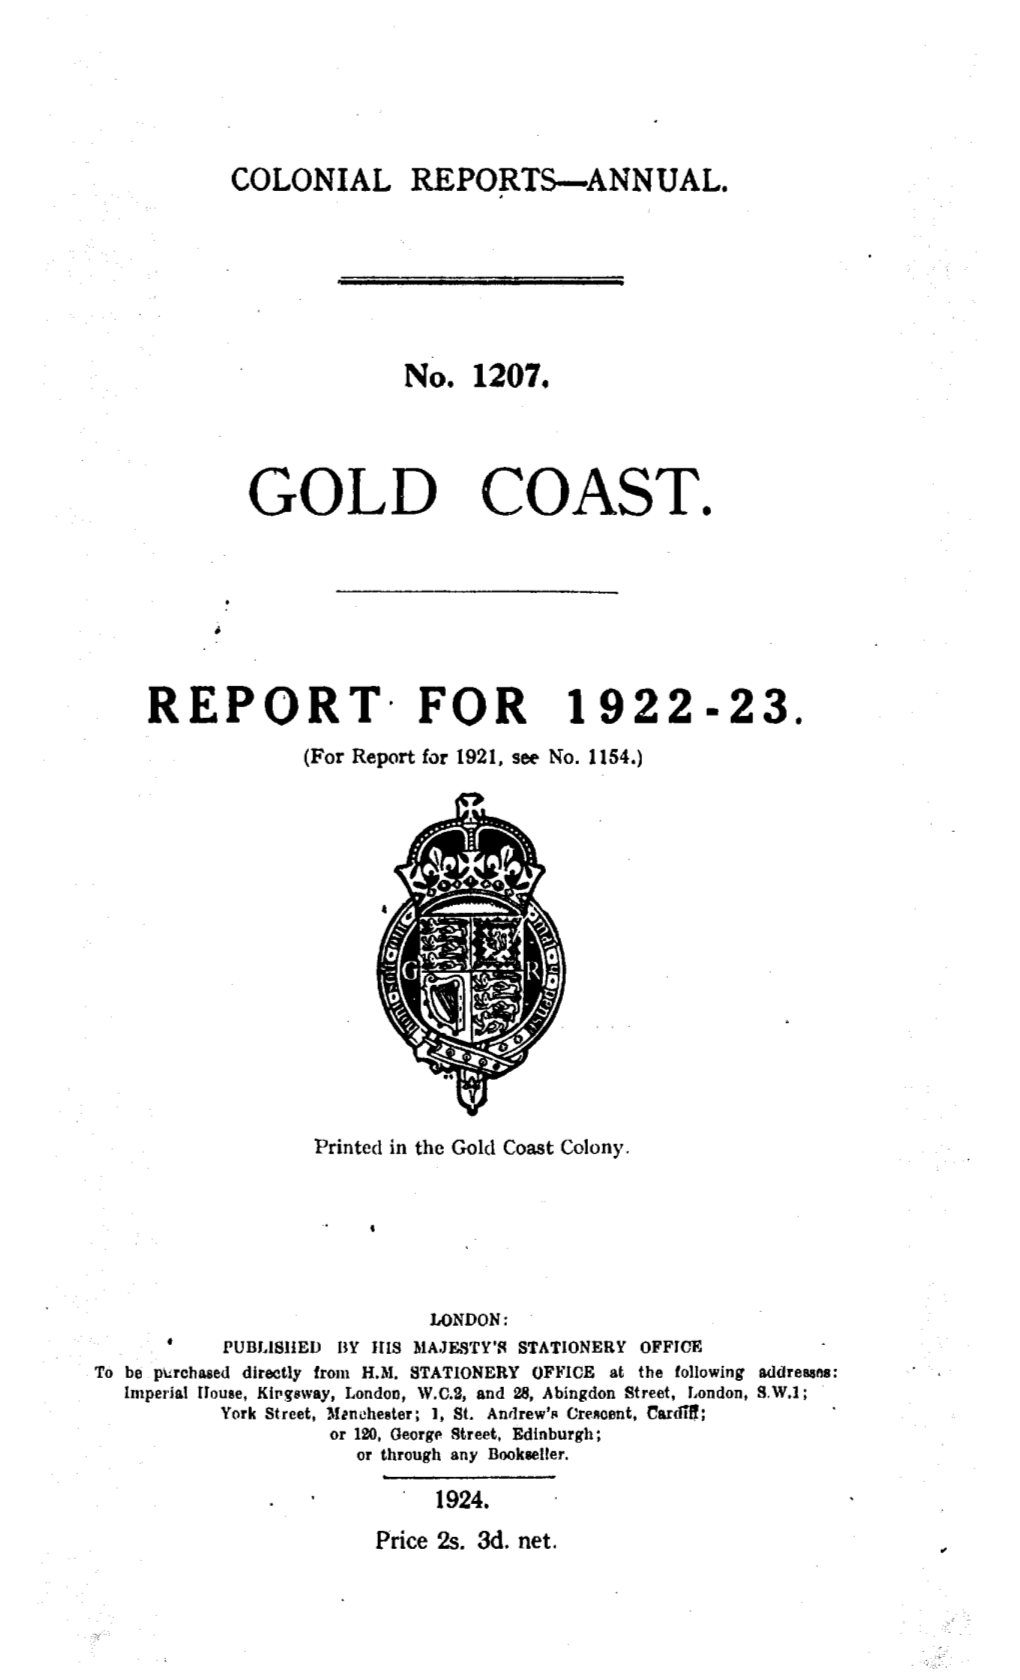 Annual Report of the Colonies, Gold Coast, 1922-23